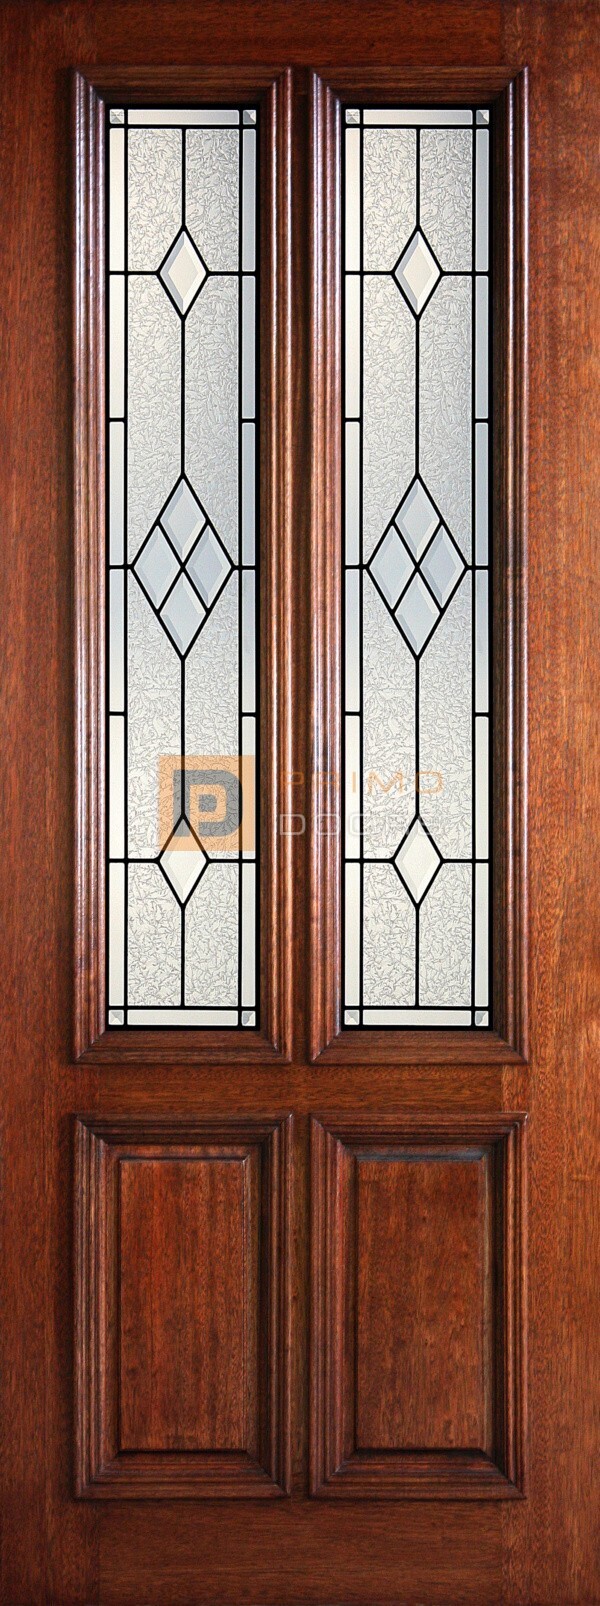 8′ 2/3 Twin Lite Decorative Glass with Iron Grill - Mahogany Single Front Door – PD 3080-23TL AUST